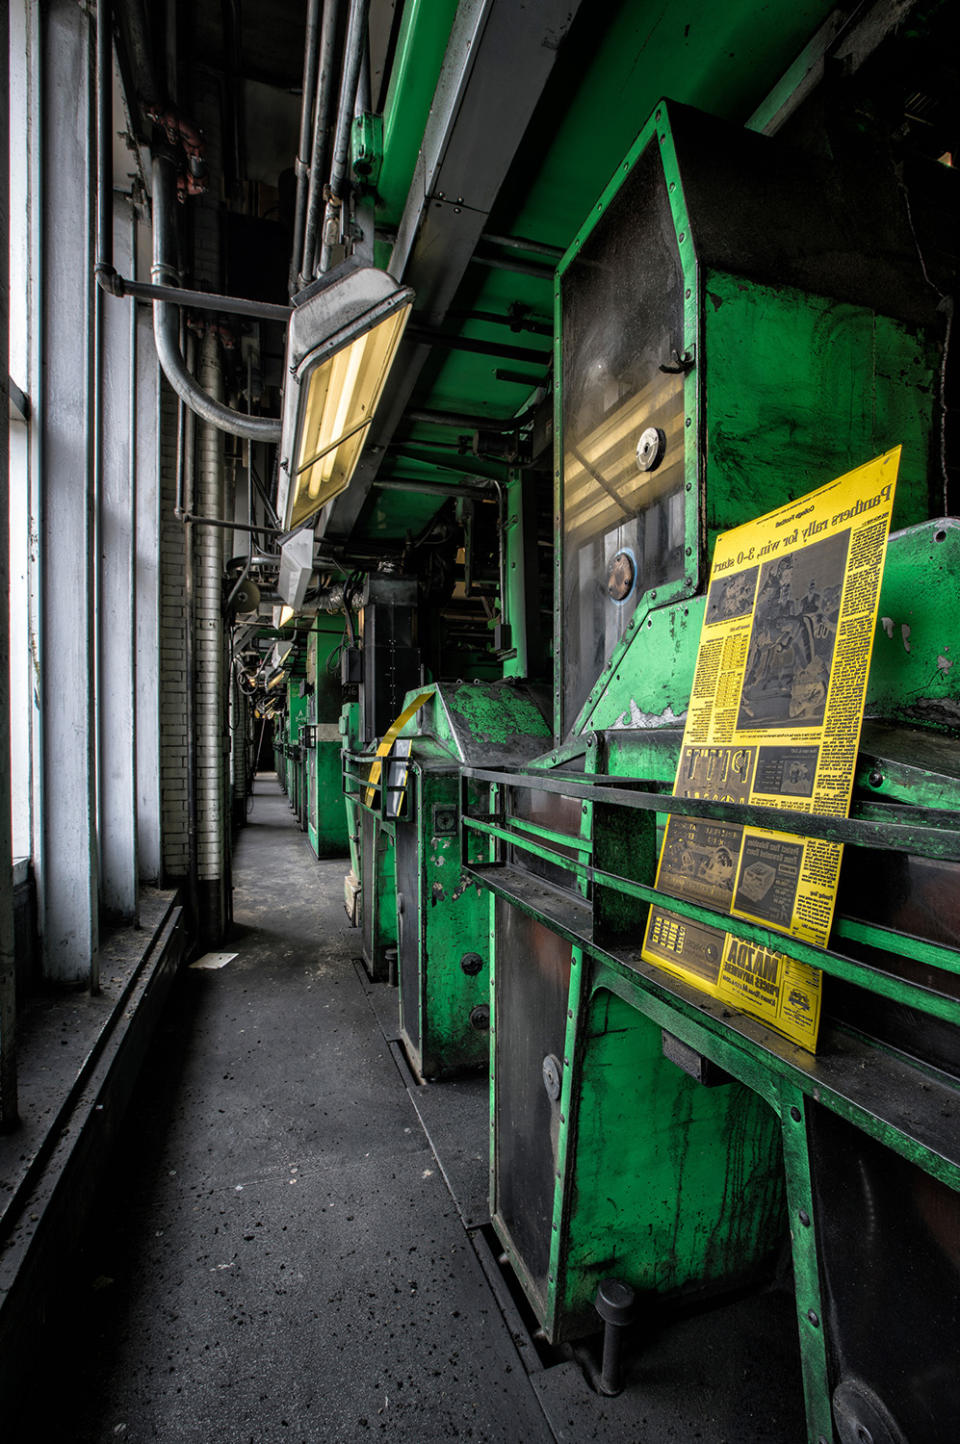 Stop the presses! Photographer documents newspaper’s eerie abandoned printing presses.